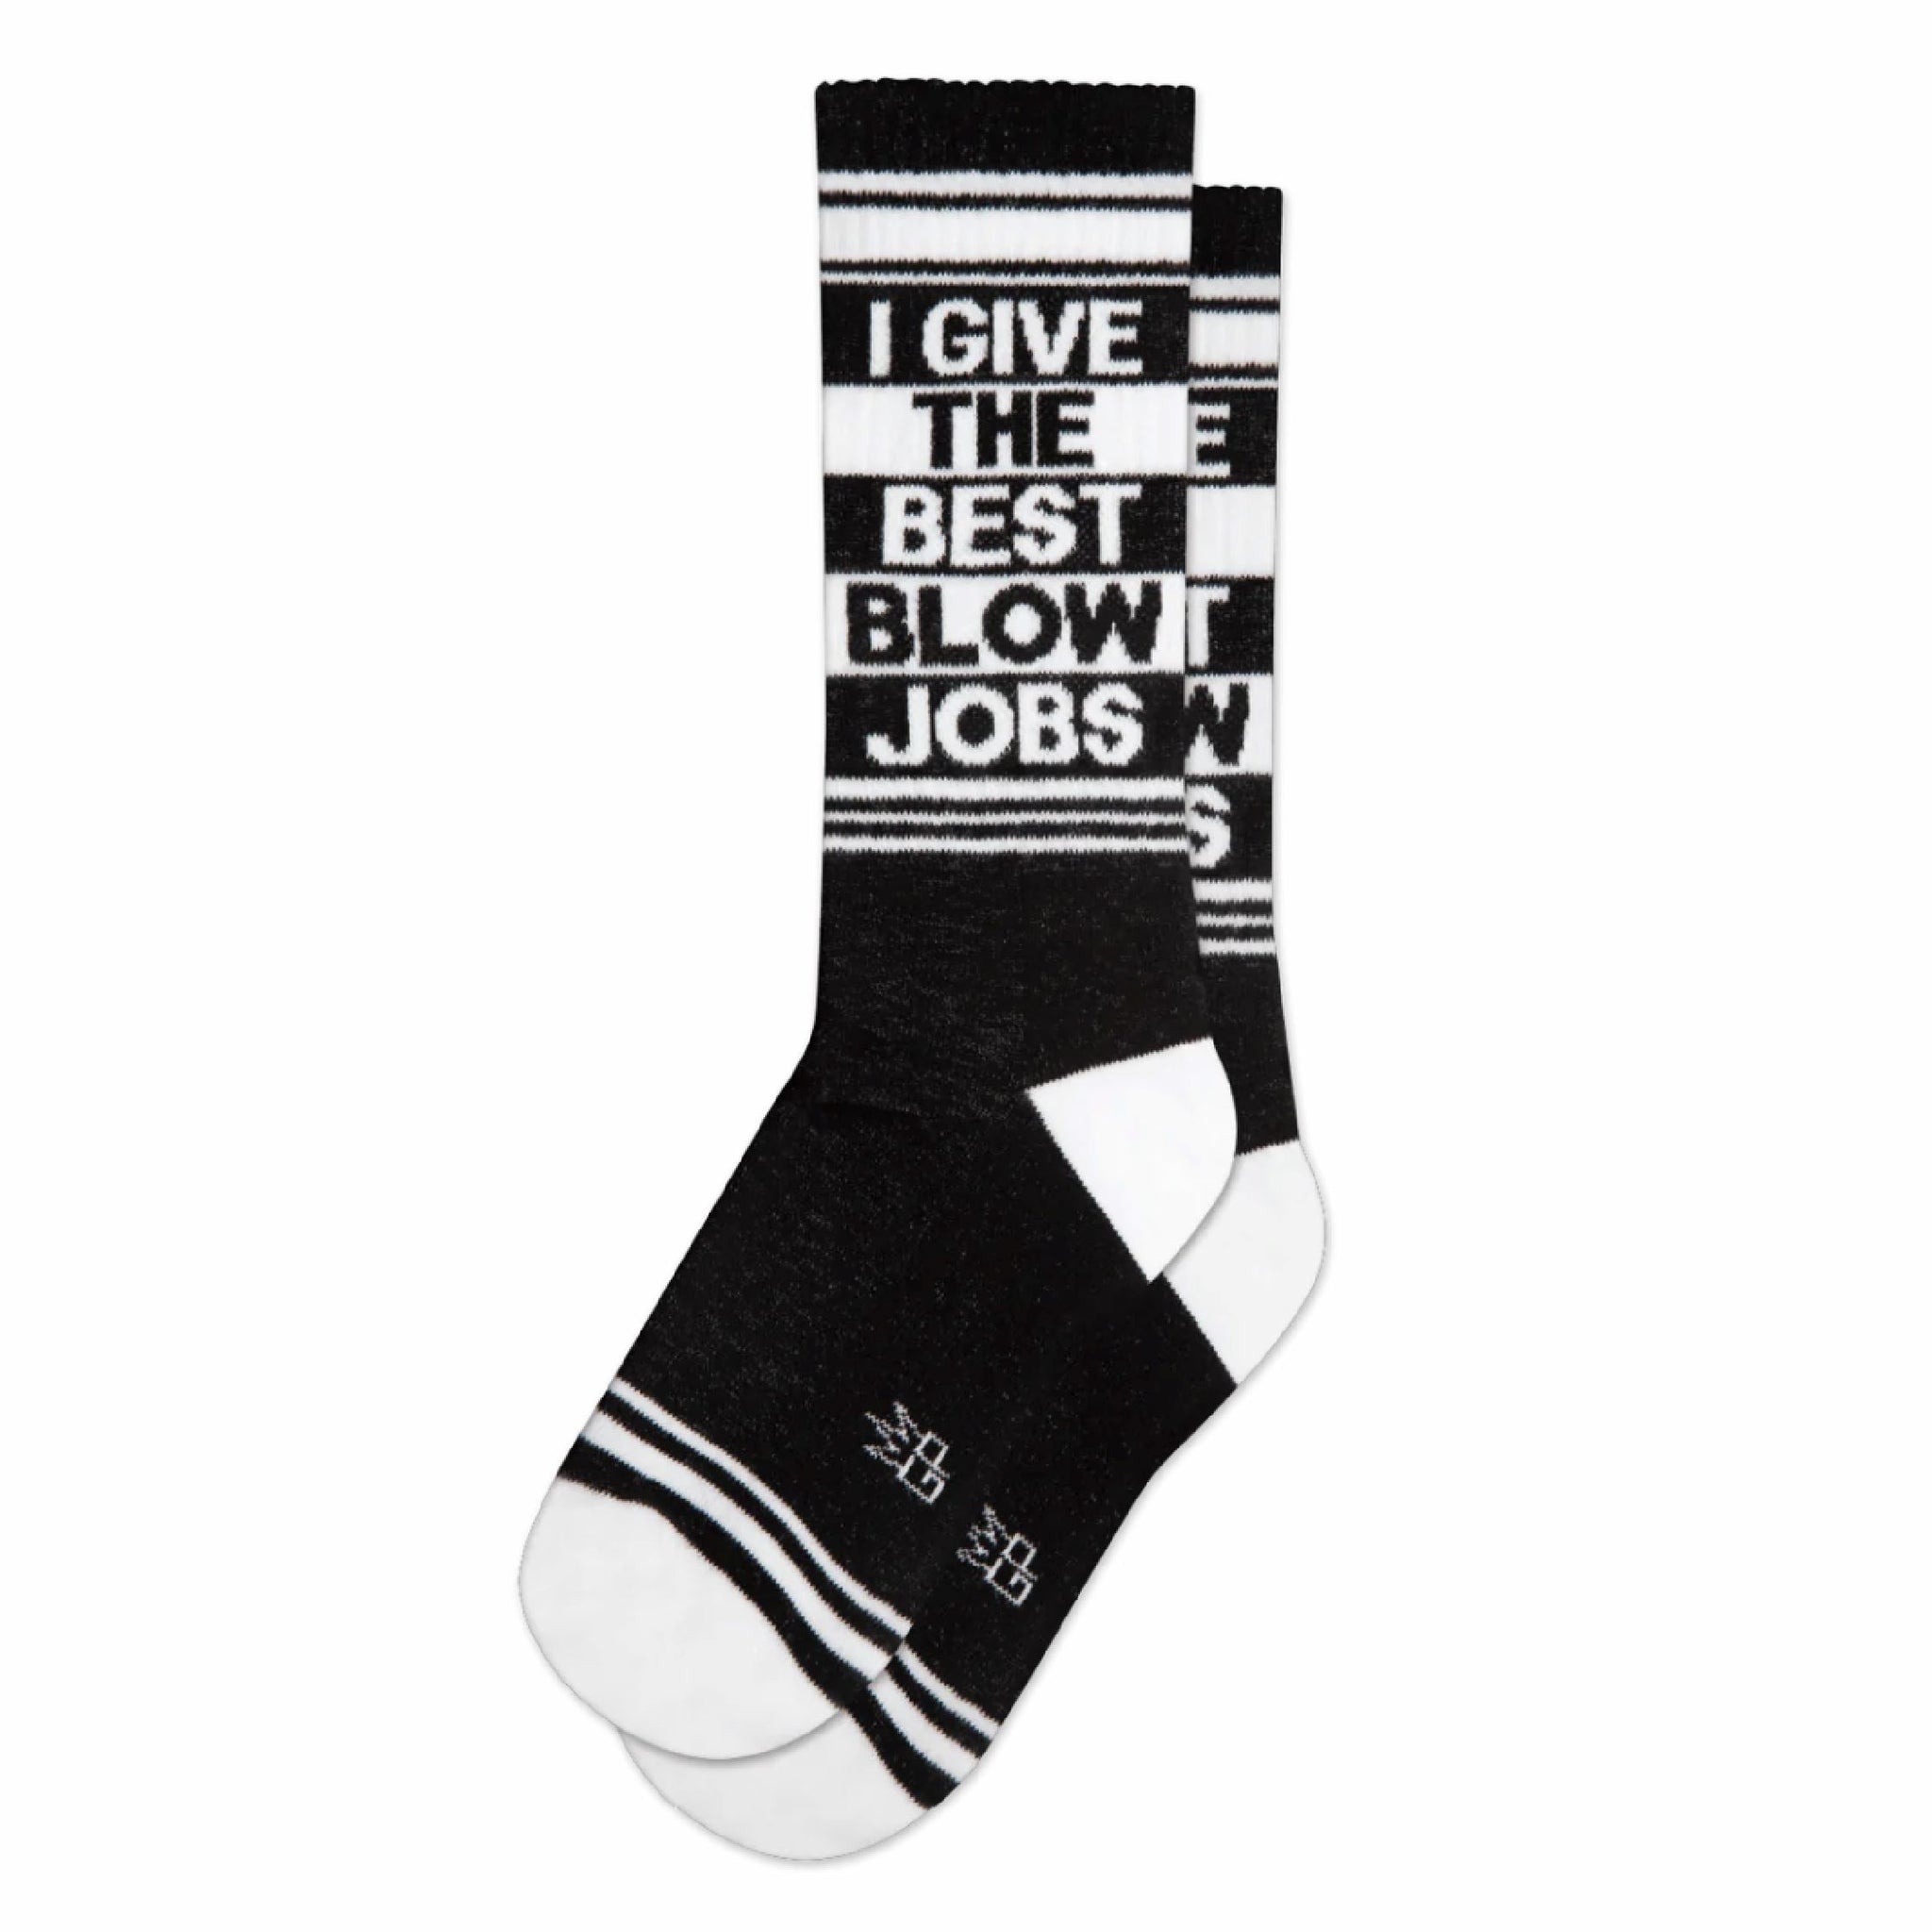 I Give The Best Blow Jobs Socks x Gumball Poodle - Third Drawer Down